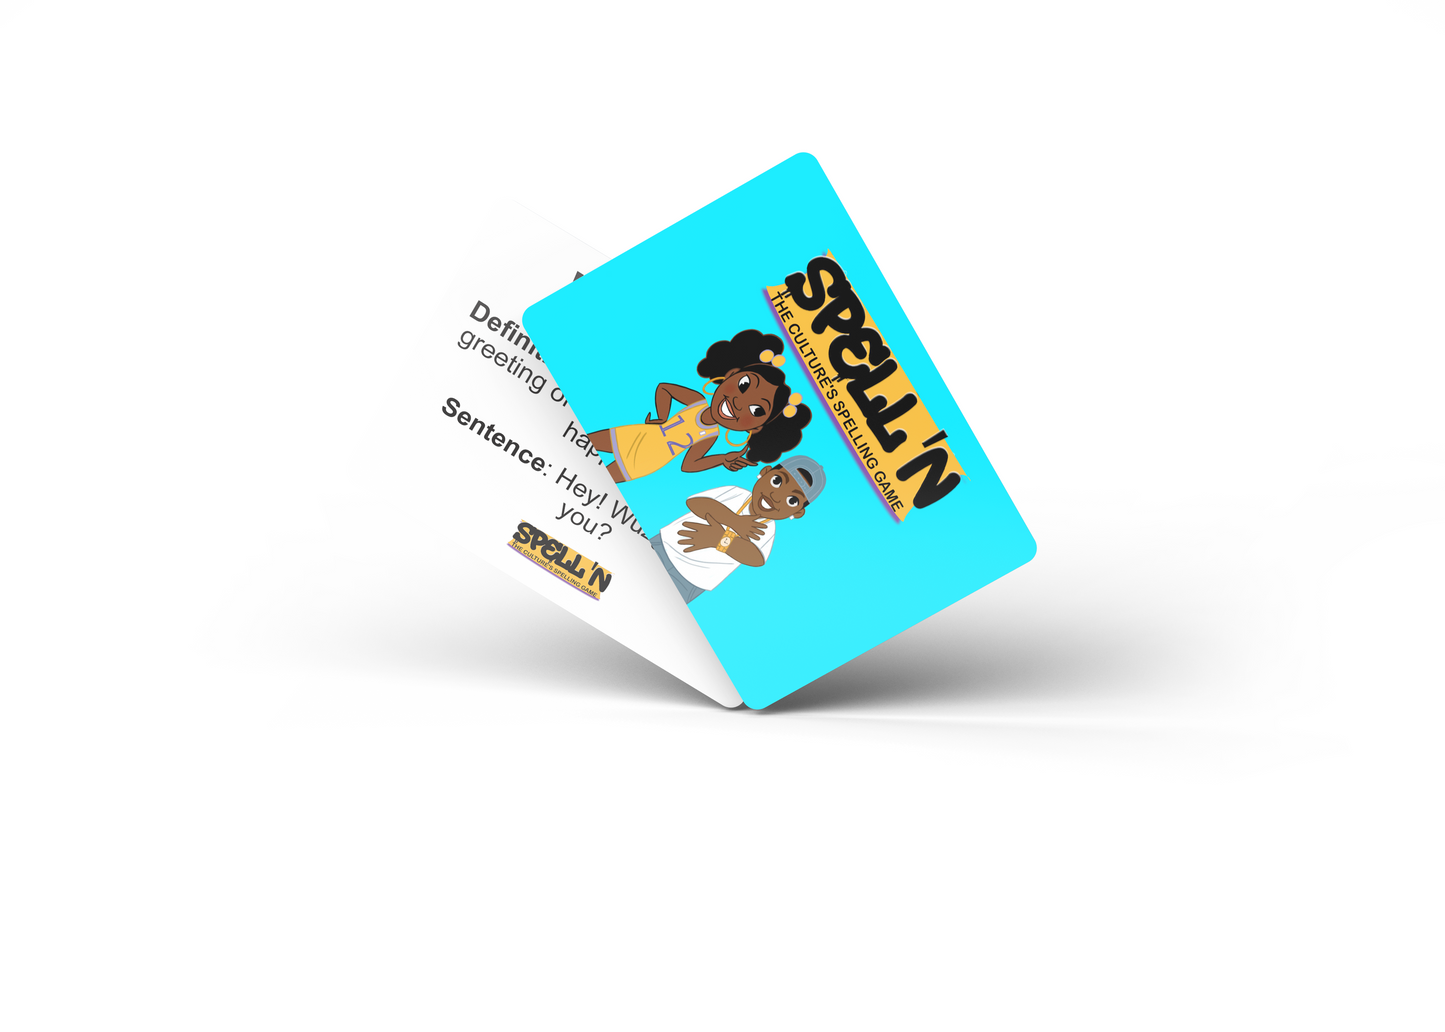 Spell'n - The Culture's Spelling Game Family Black Culture Card Game For Everyone